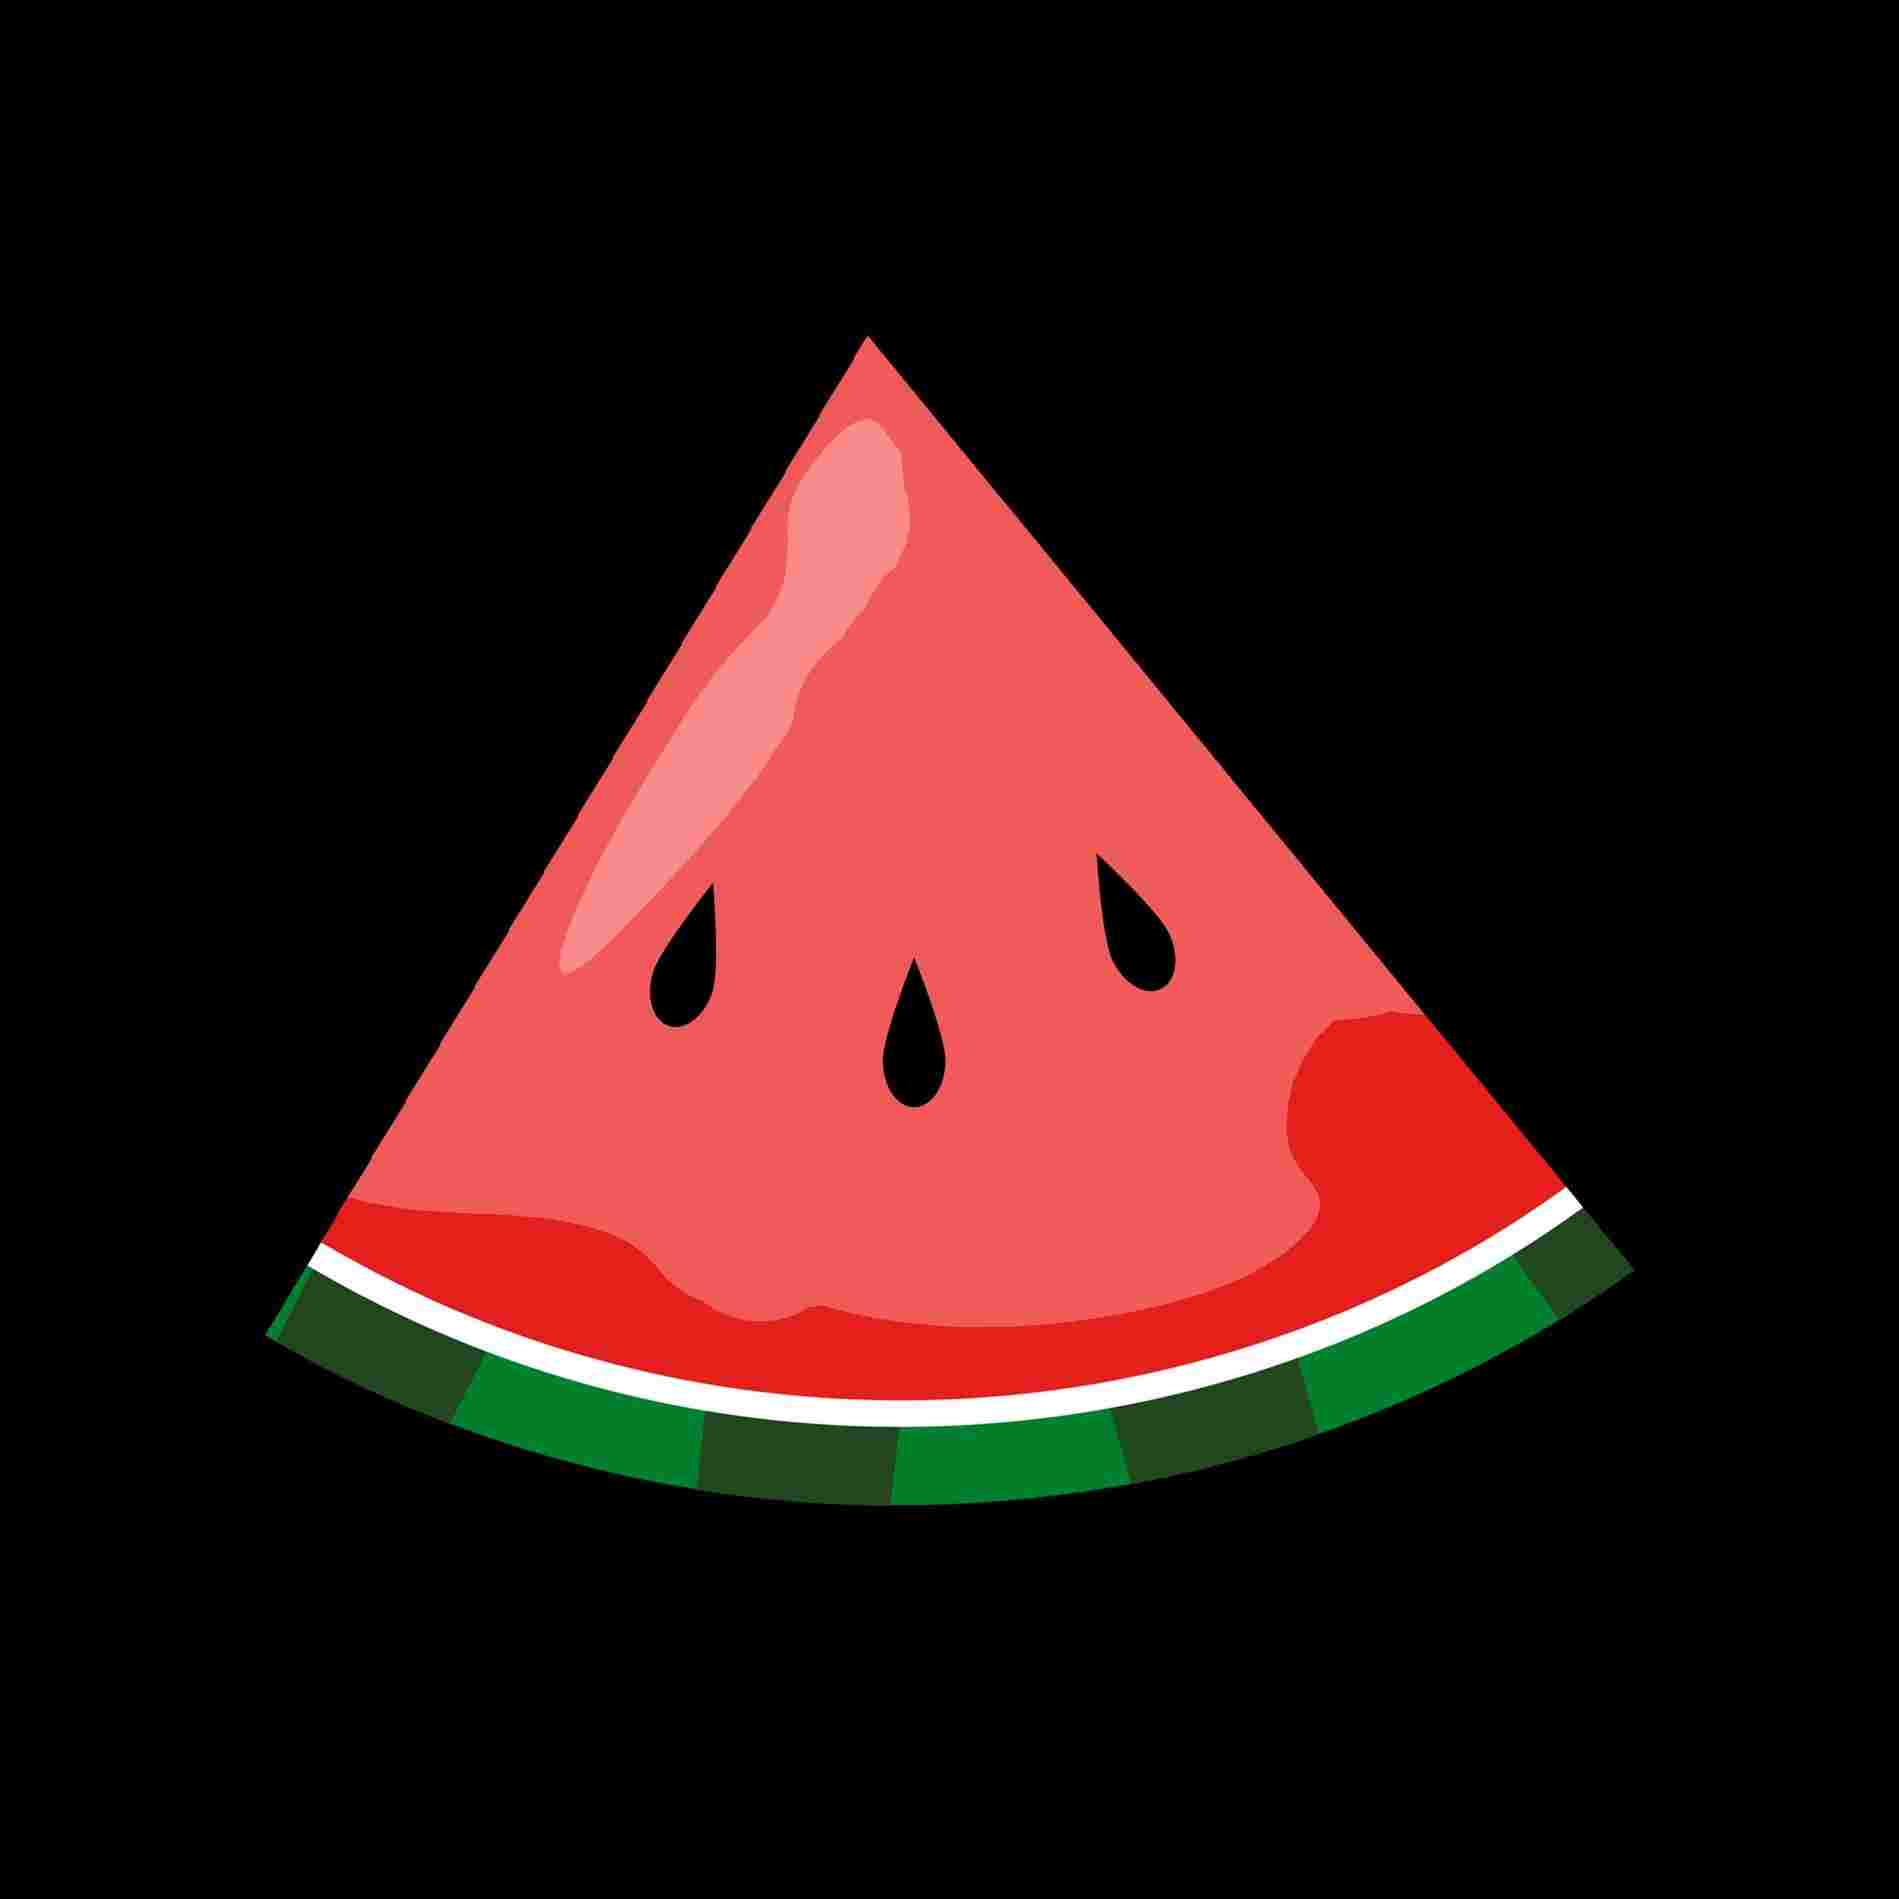 Watermelon Slice Drawing | Free download on ClipArtMag